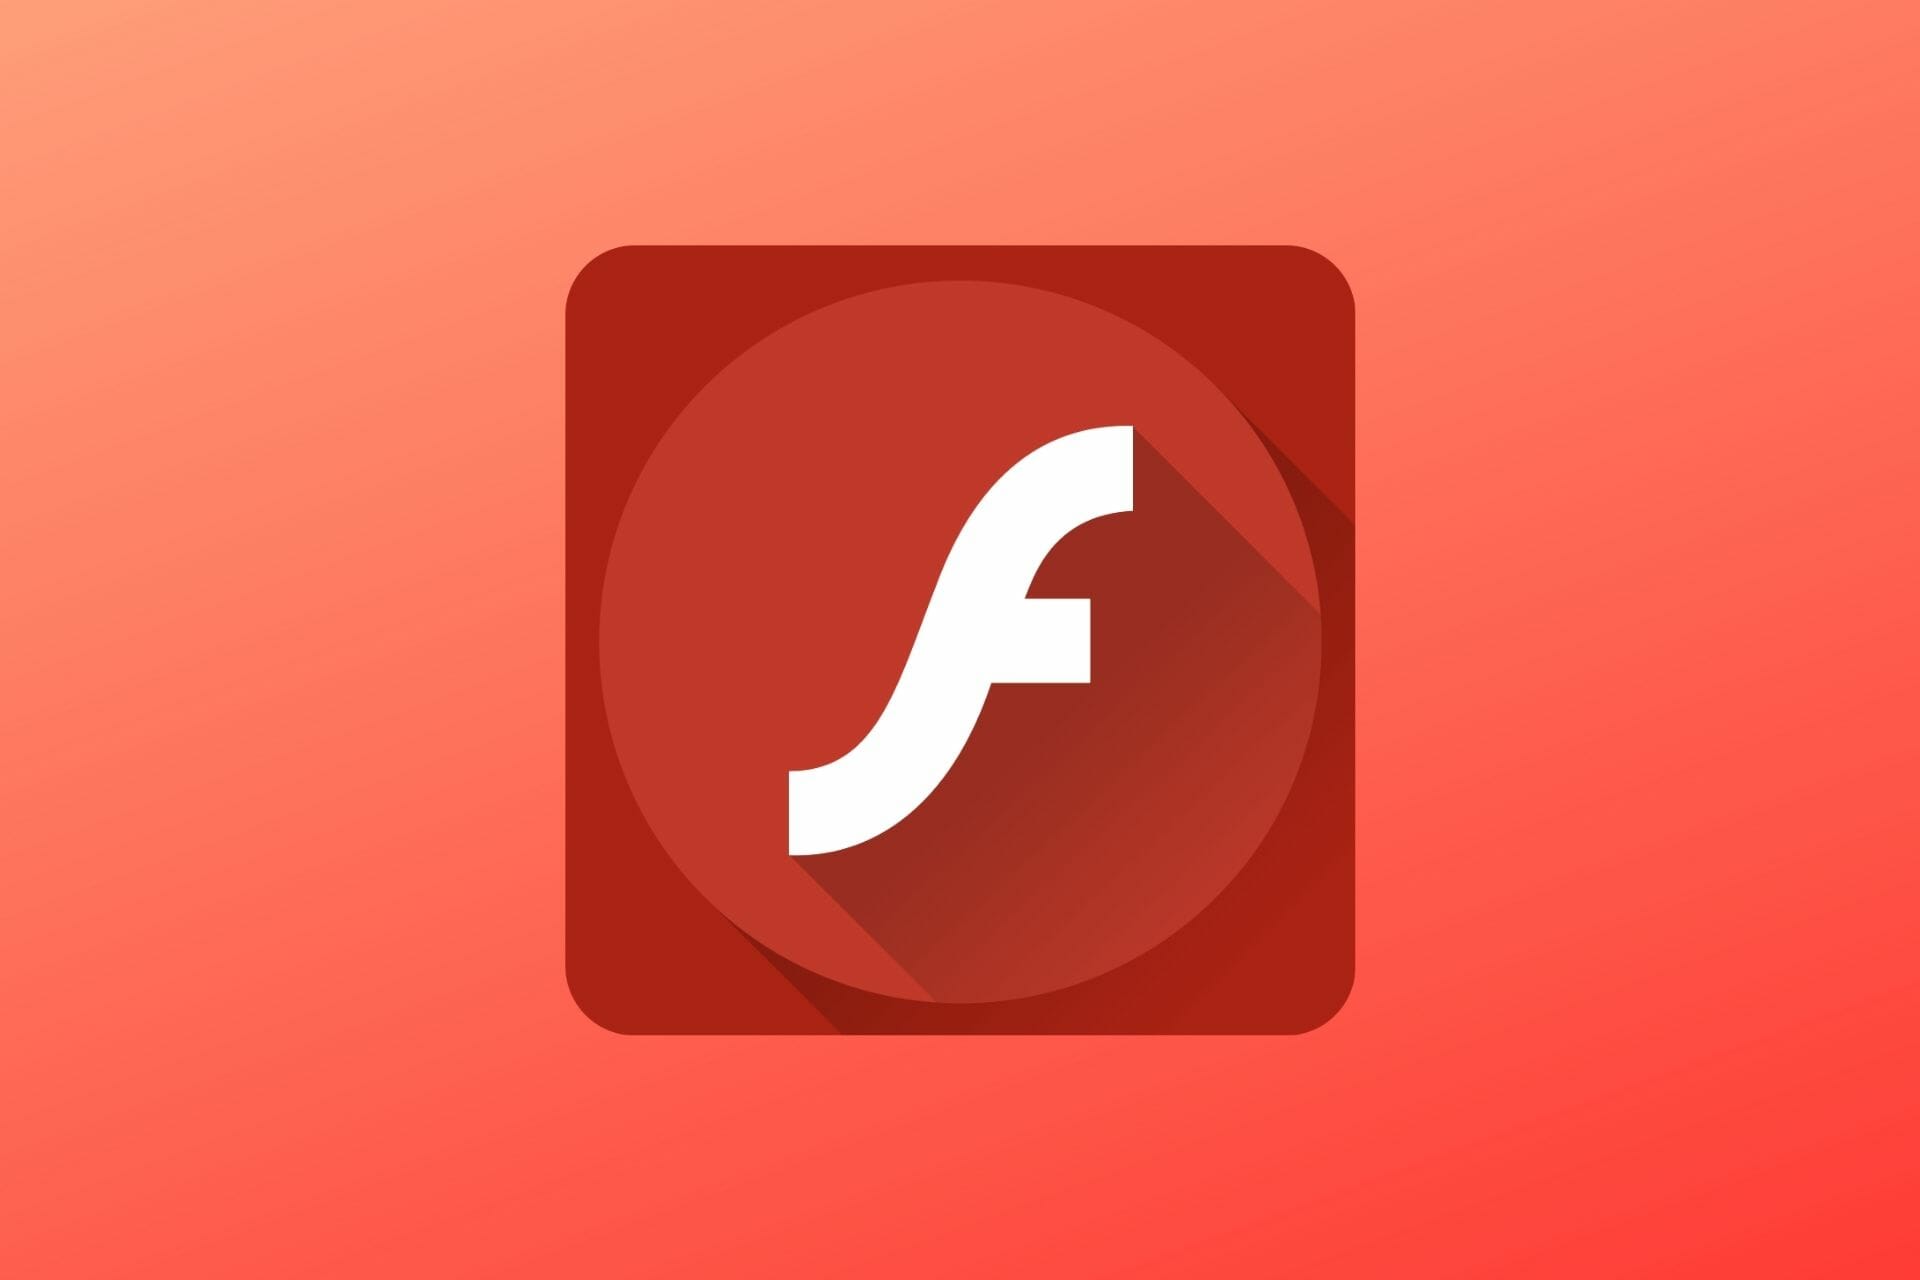 adobe flash player free download for windows 10 edge browser